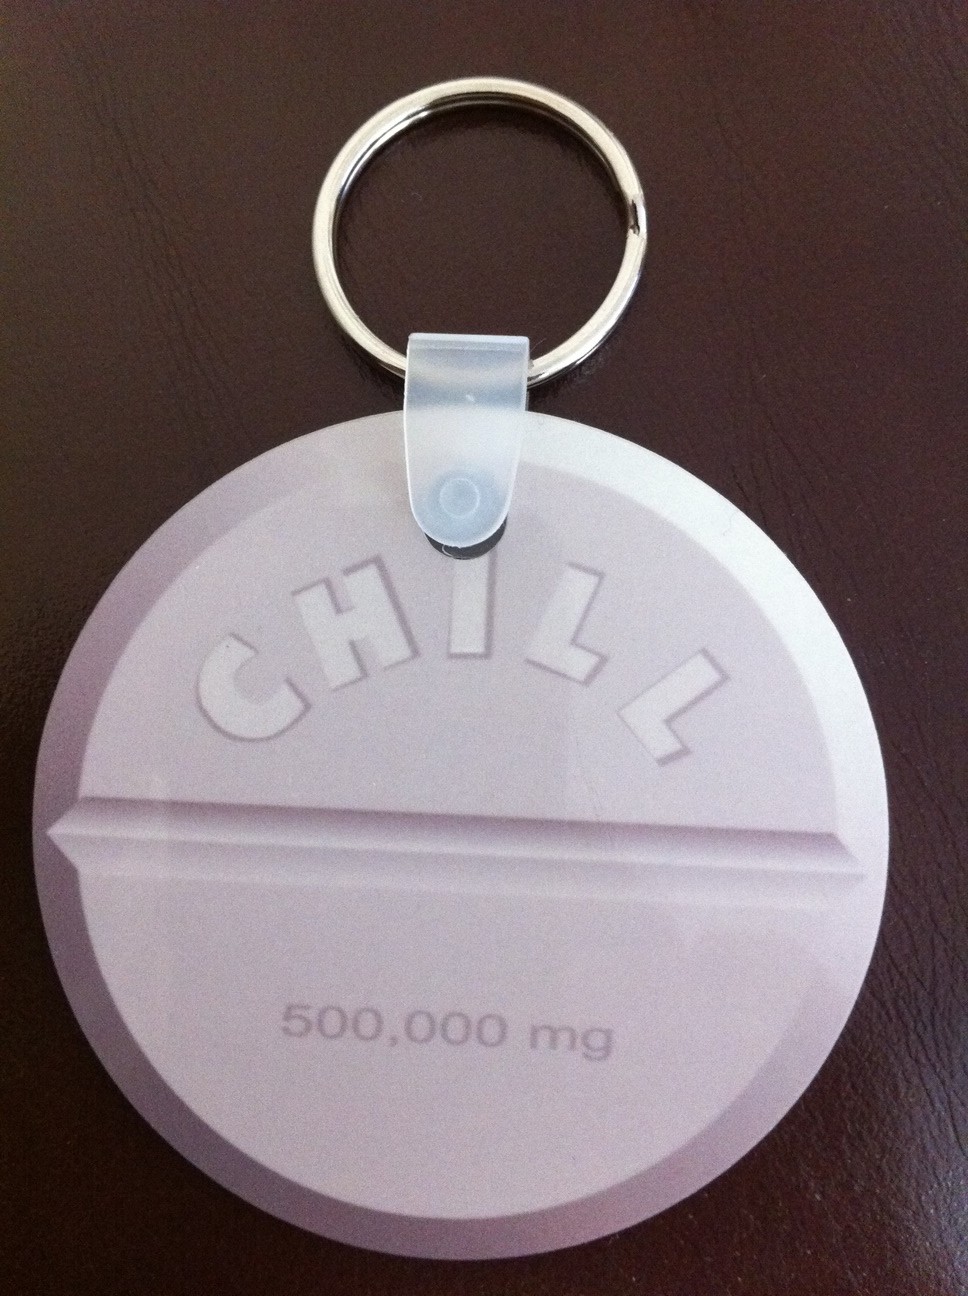 Chill Pill Keychain made with sublimation printing